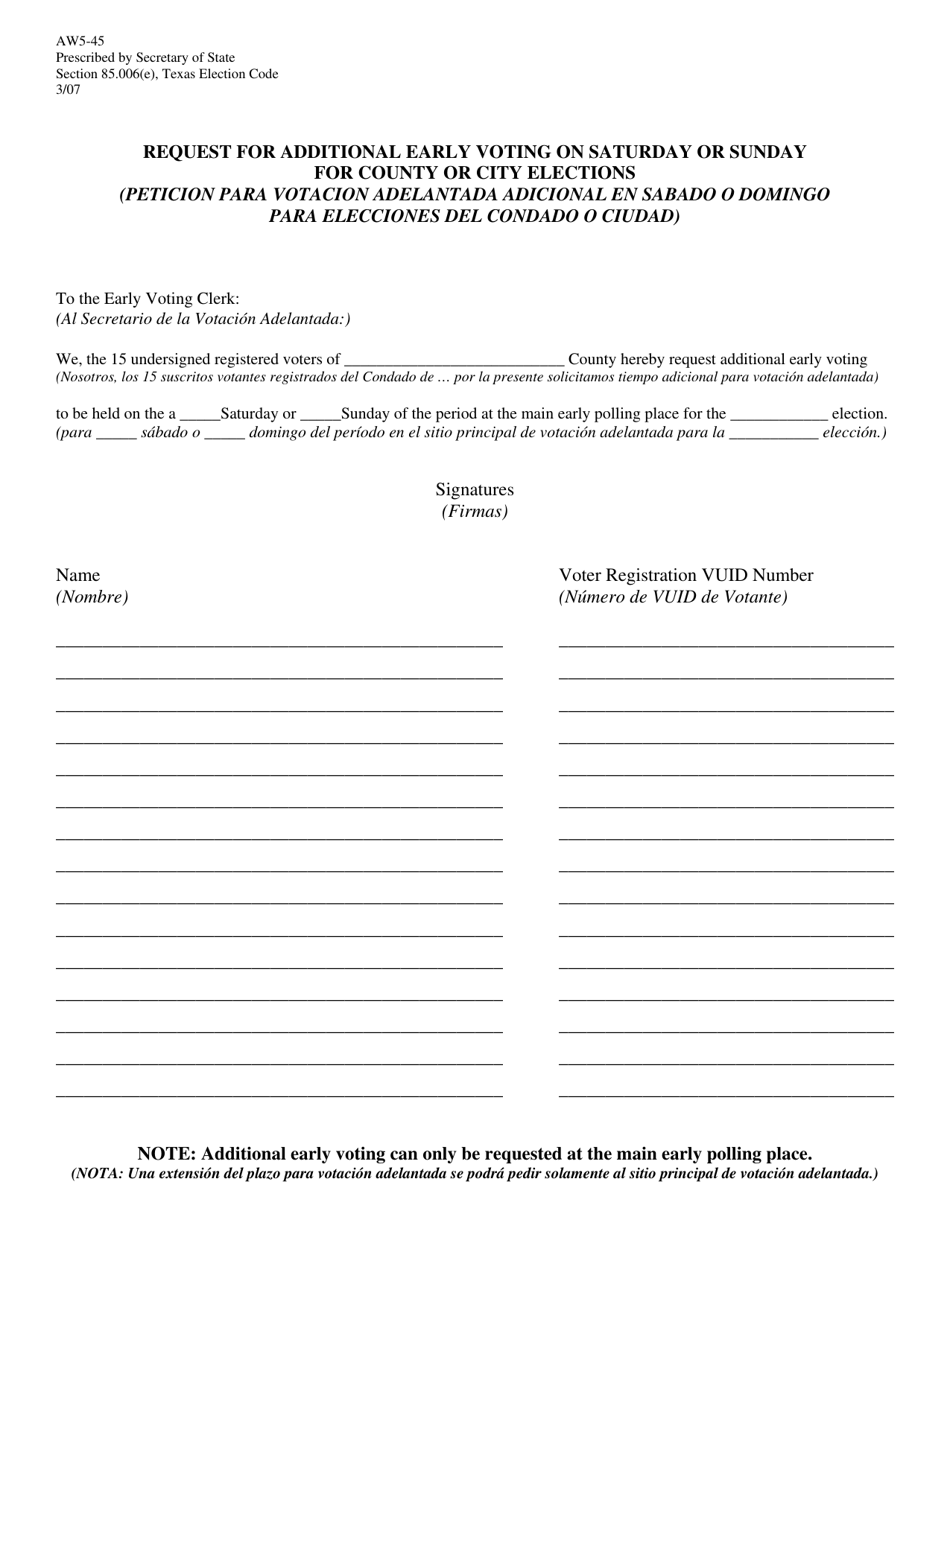 Form AW5-45 Request for Additional Early Voting on Saturday or Sunday for County or City Elections - Texas (English / Spanish), Page 1